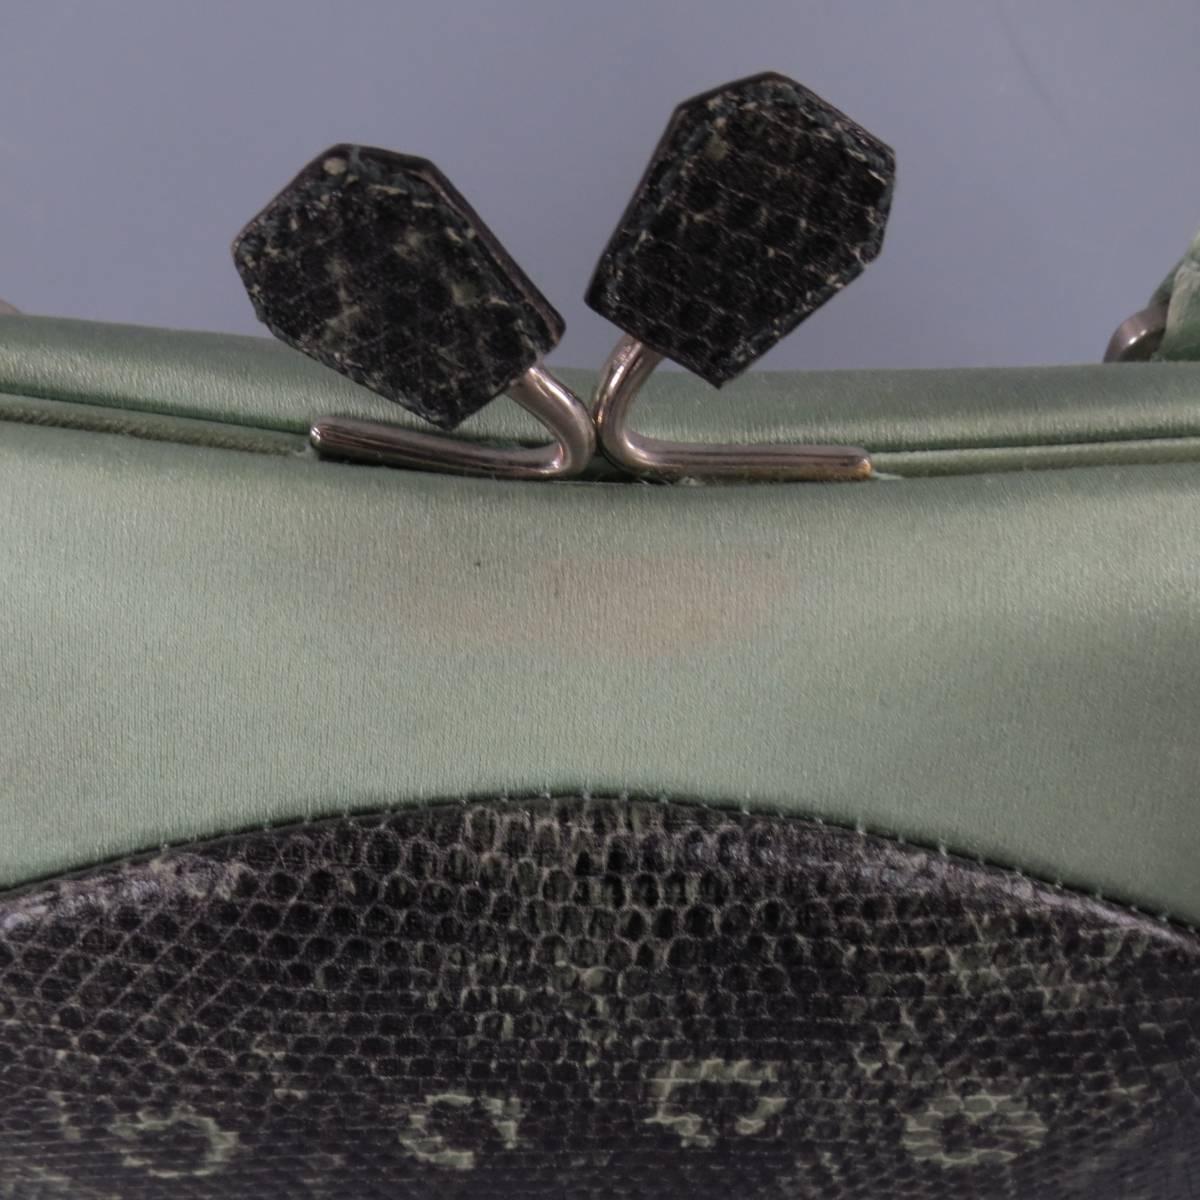 This cute mini PRADA retro inspired purse comes in a gorgeous mint green satin with mating lizard leather body, satin piping, enamel plaque, and kiss lock closure. In great condition with minor discoloration. Includes dust bag and authentication